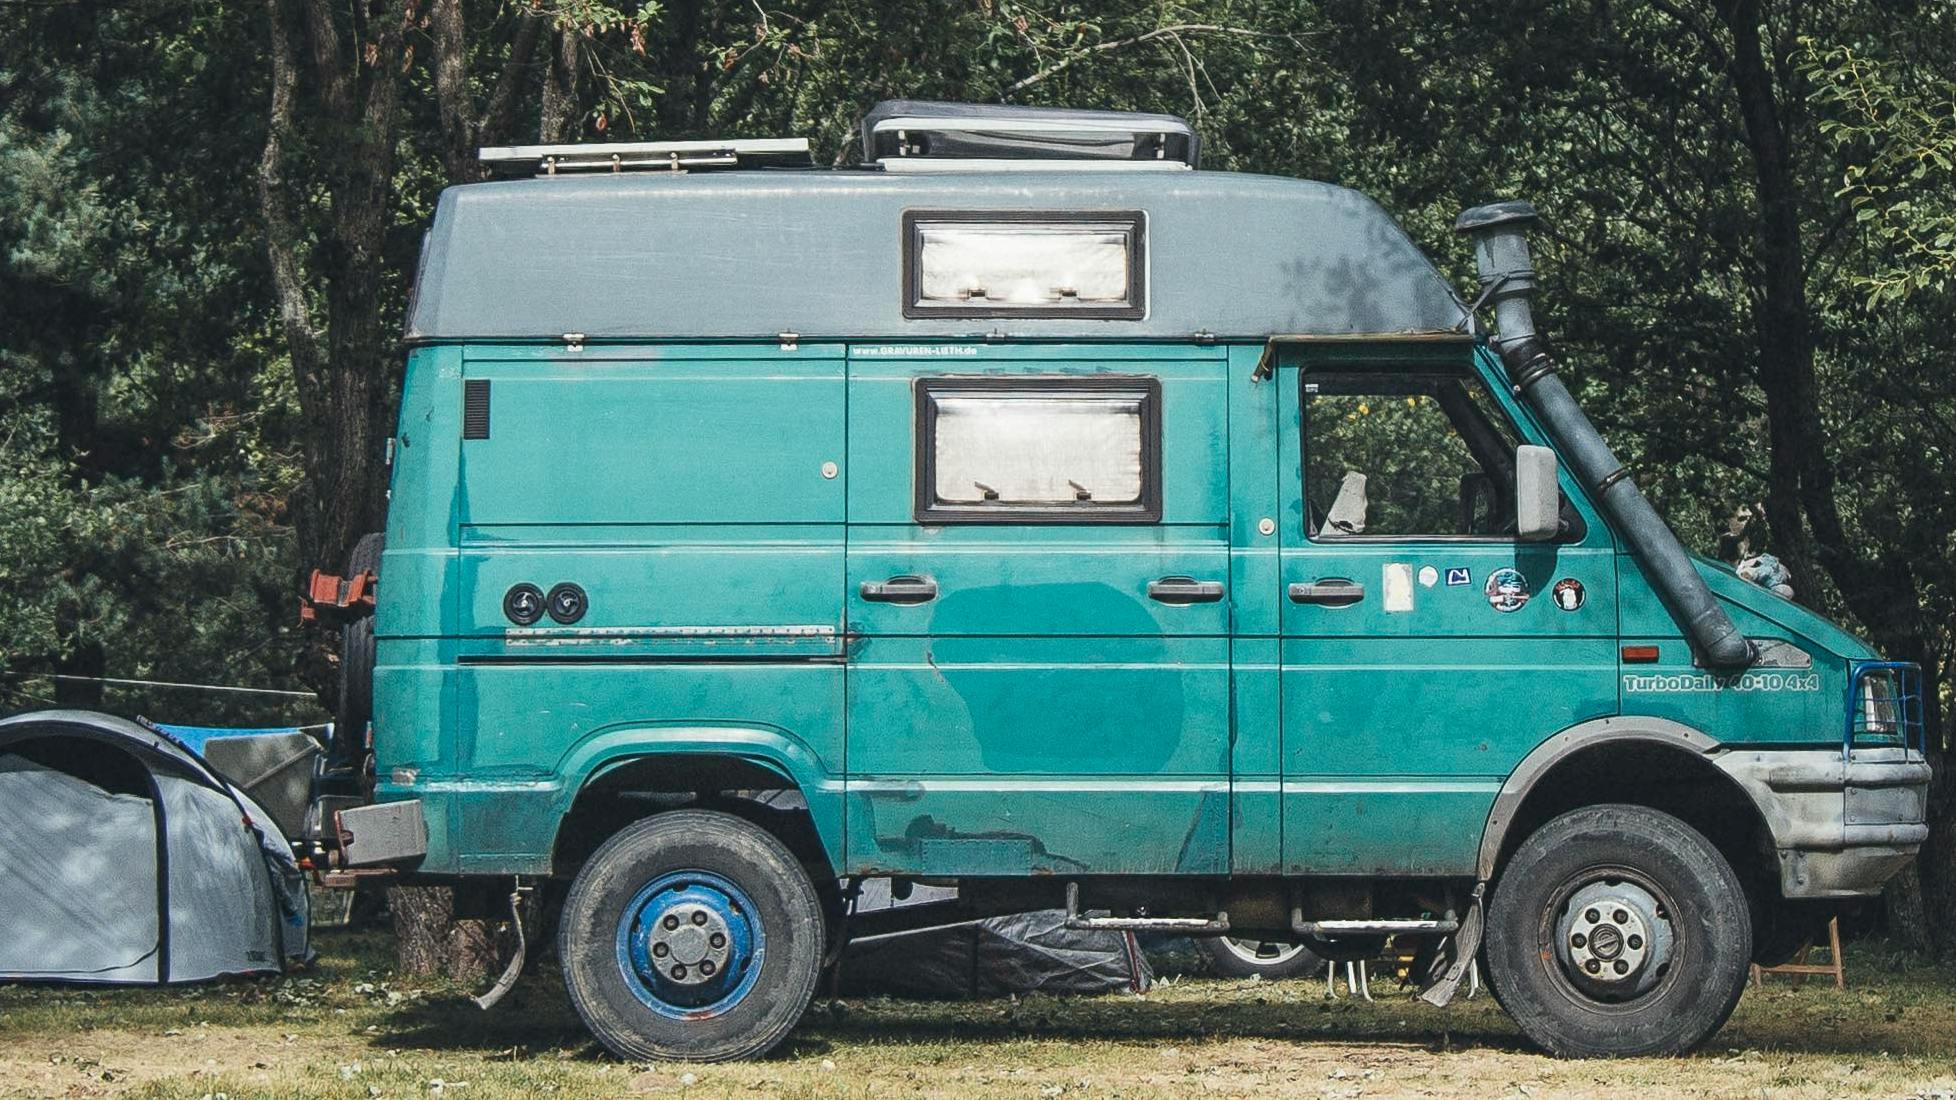 A turquoise campervan at a campsite